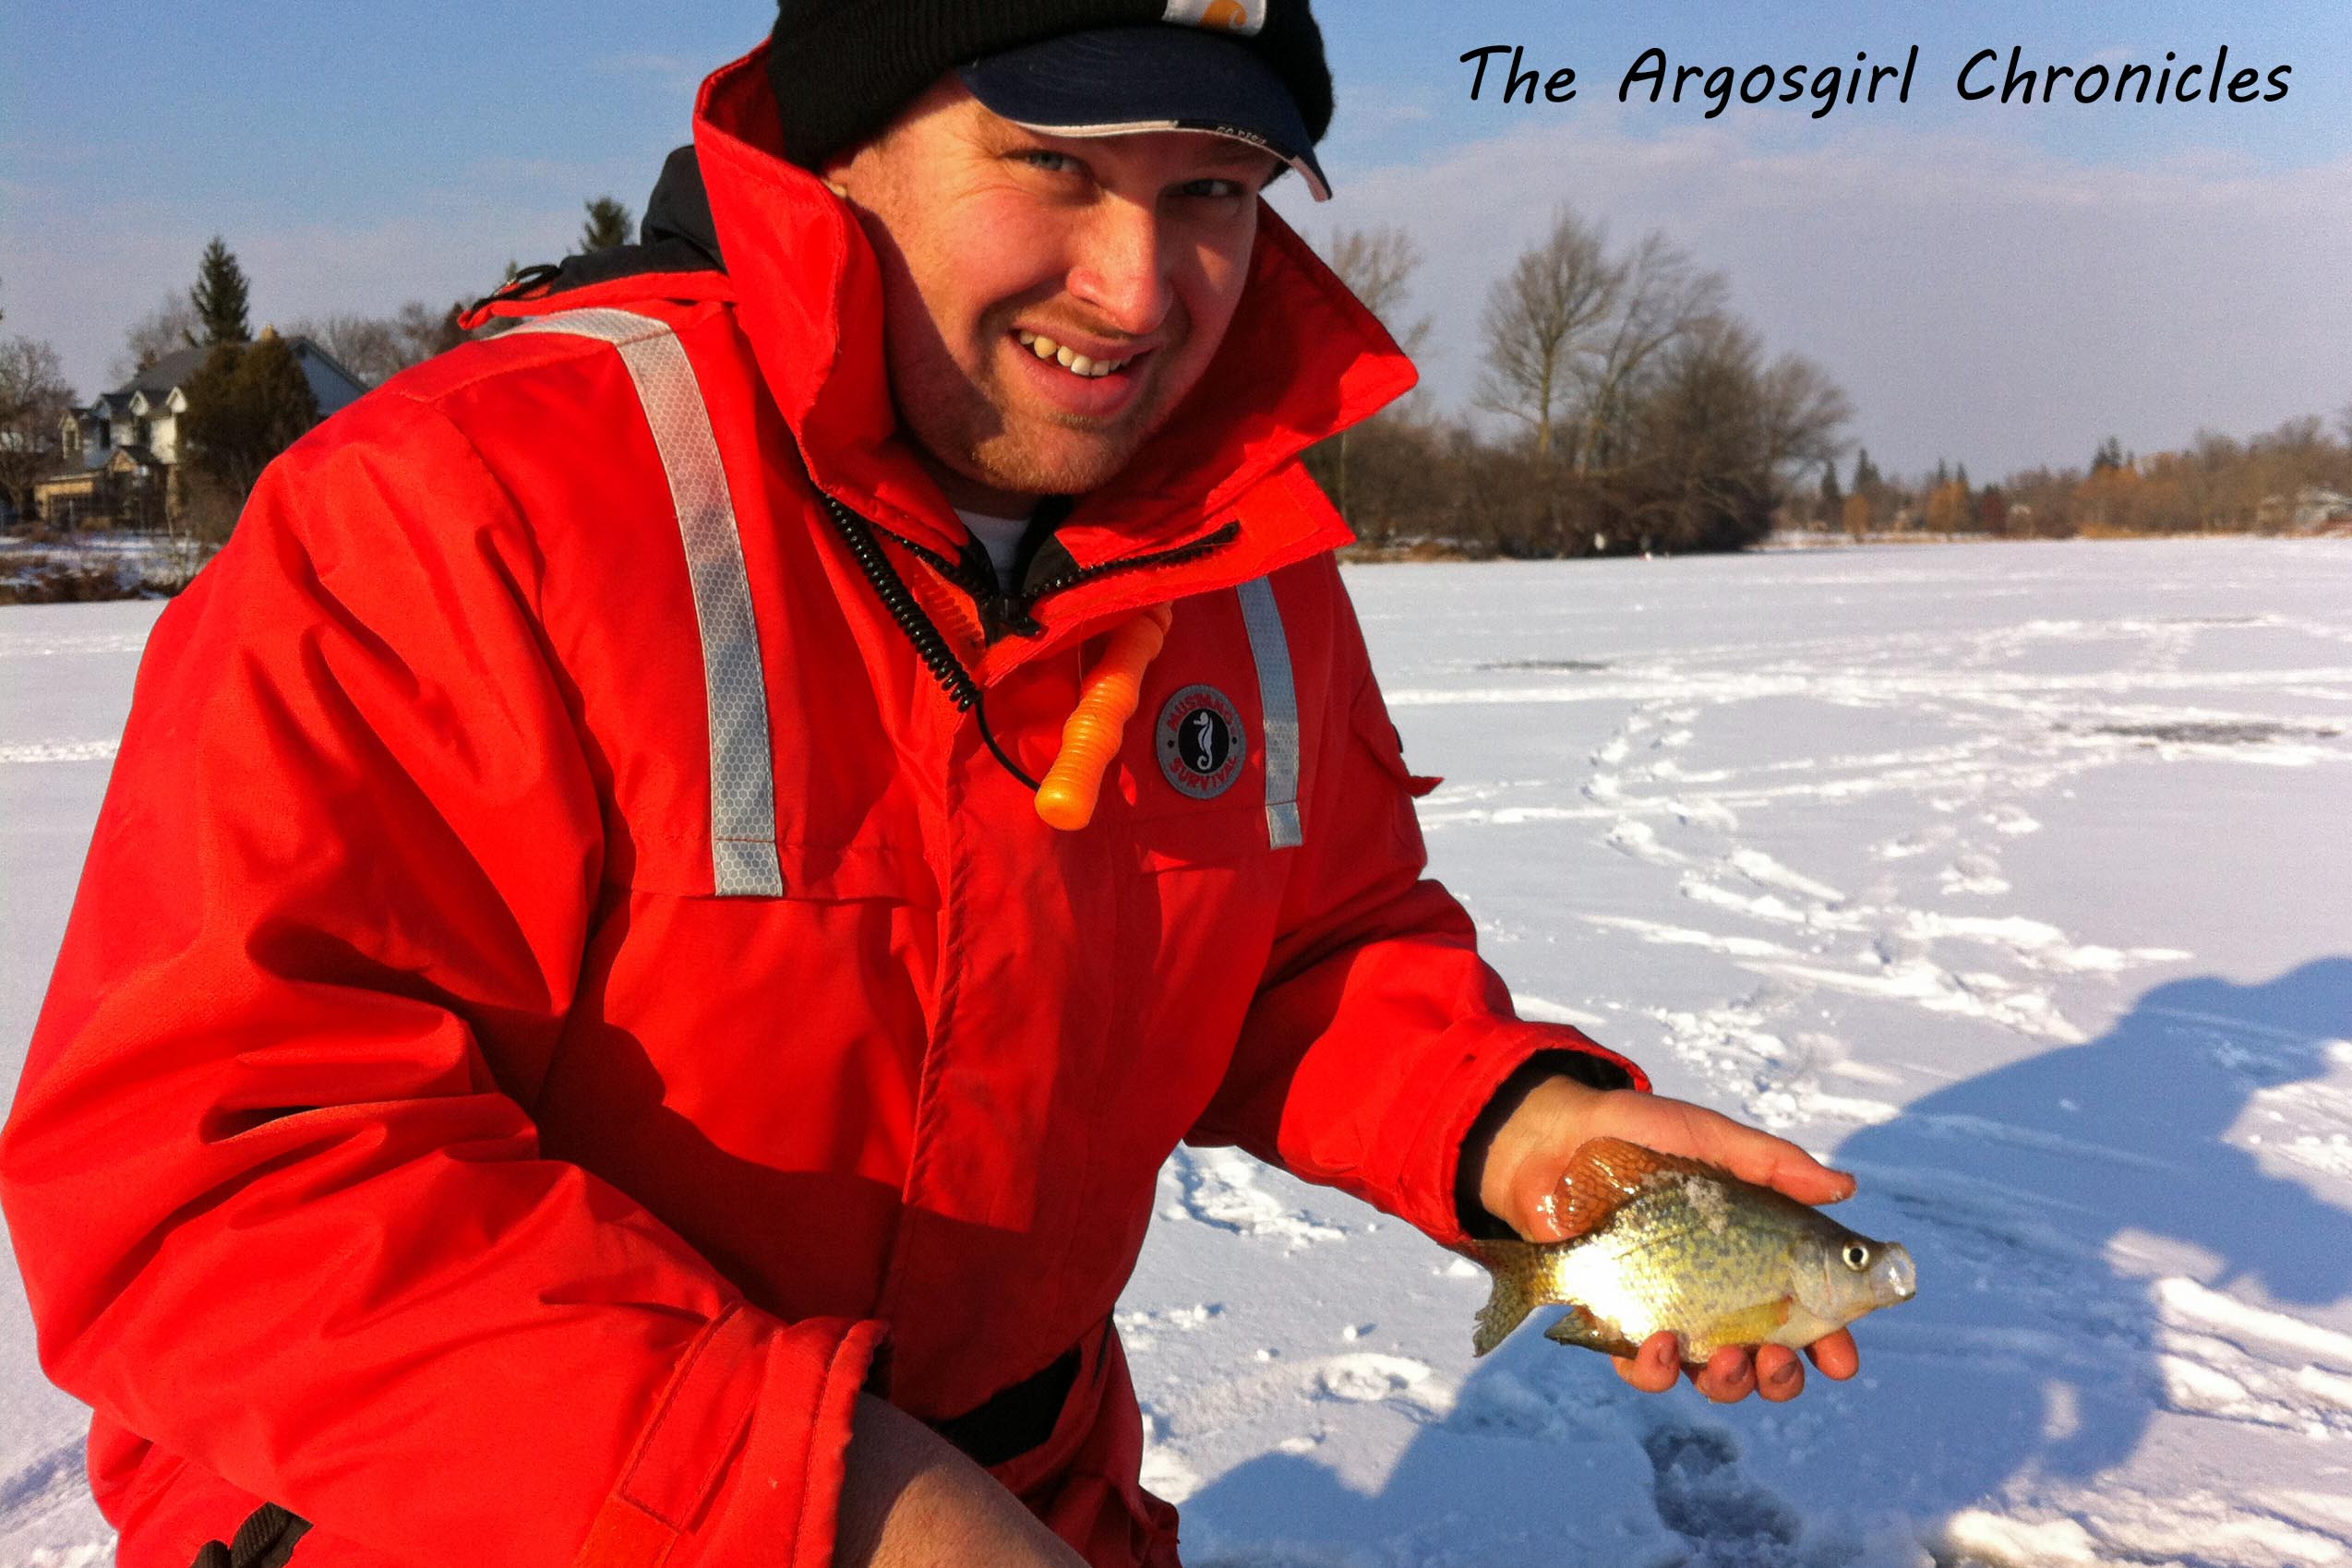 Sure it's a tiny fish, but look at the smile on Darrell's face. 